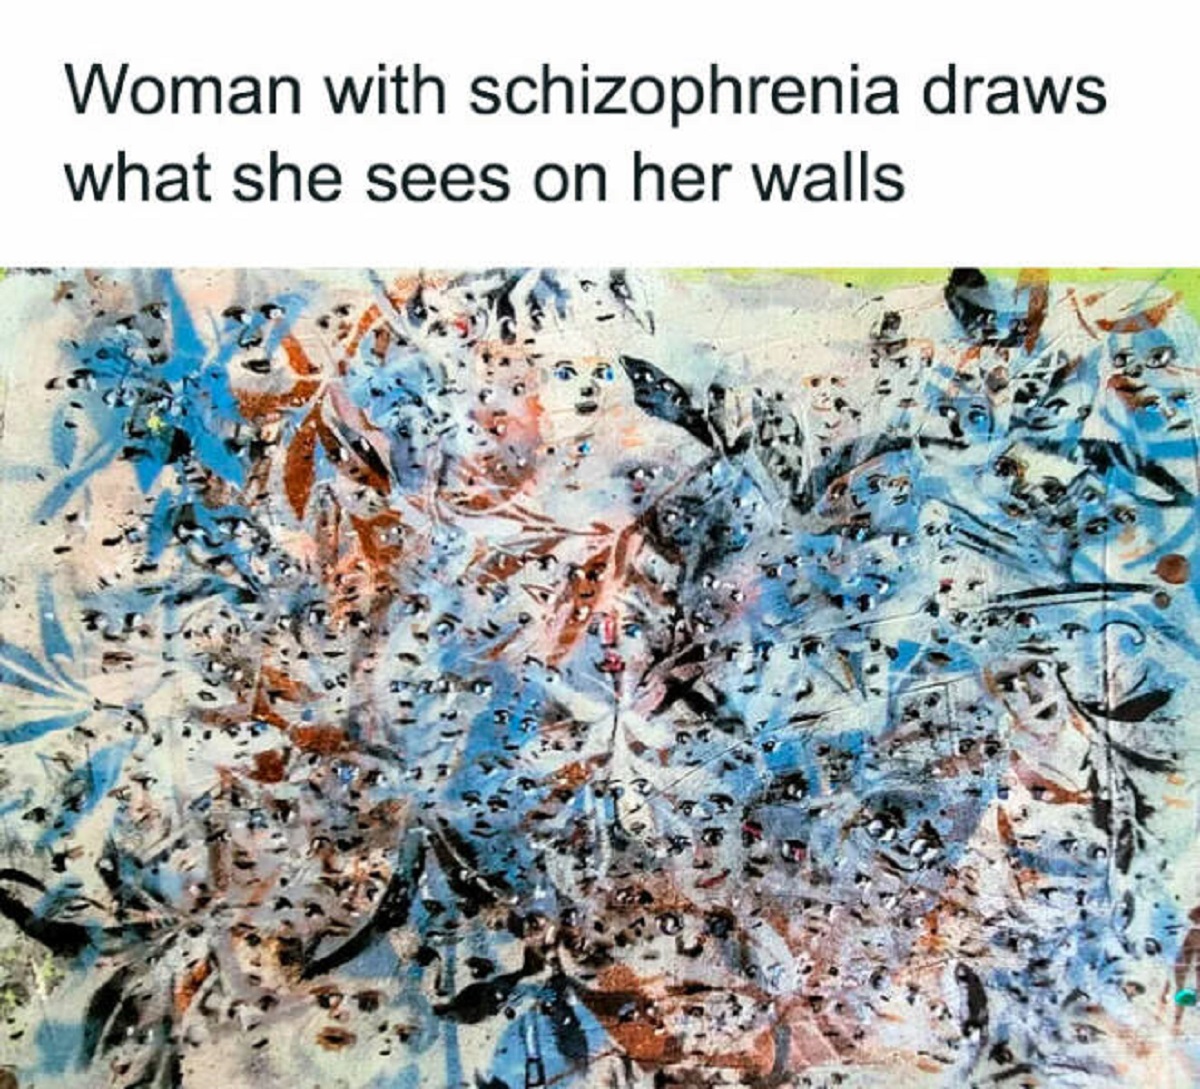 person with schizophrenia draws what they see - Woman with schizophrenia draws what she sees on her walls